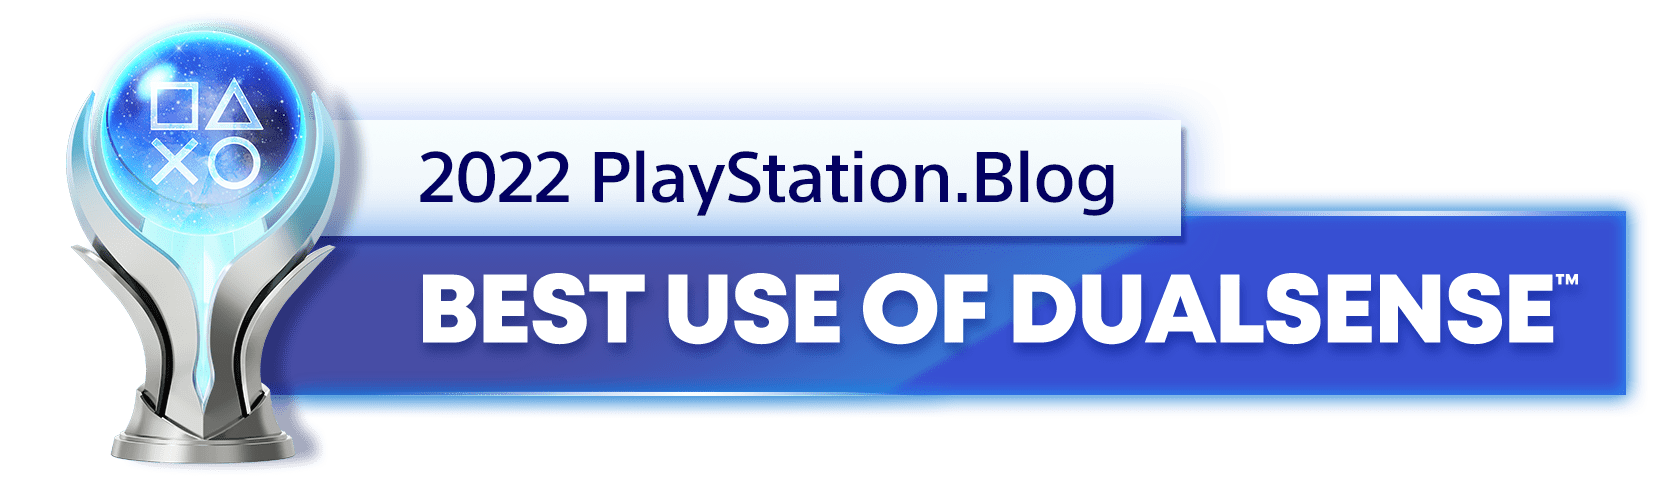 The Game Awards 2022 Winners, Announcements - PlayStation LifeStyle